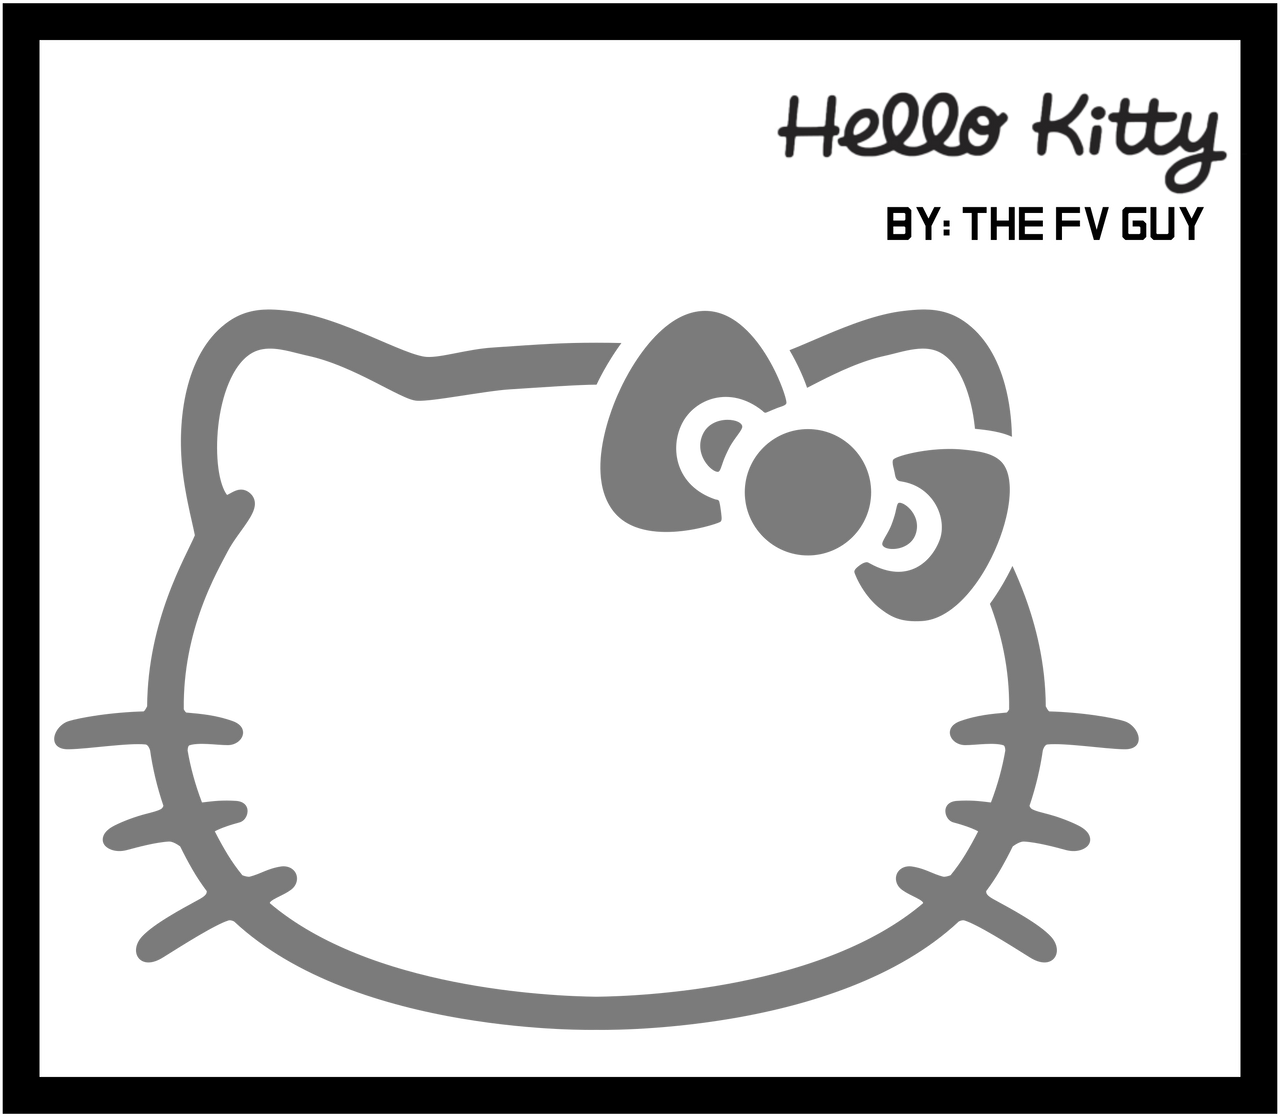 Hello Kitty Logo png images